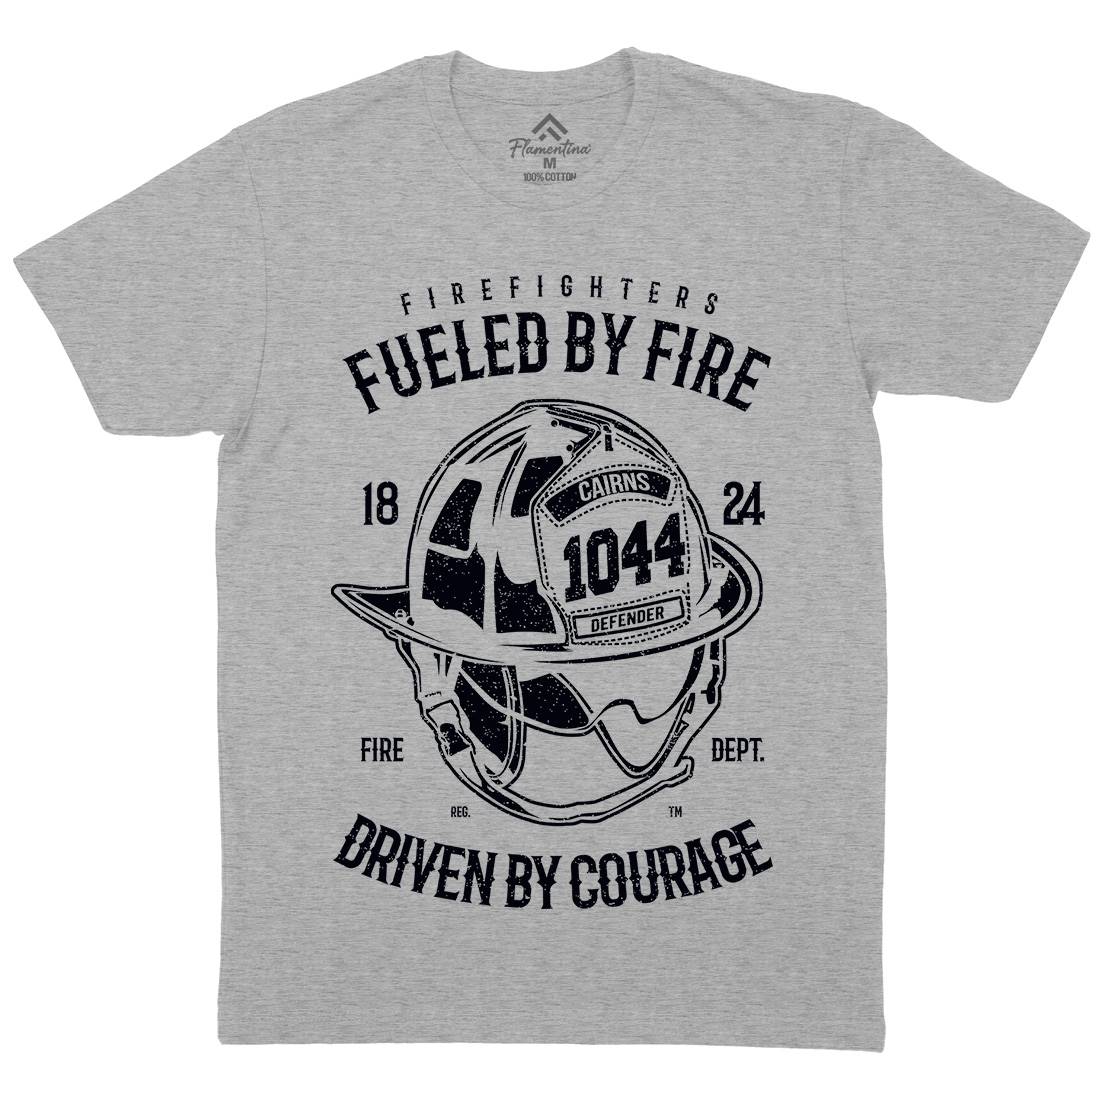 Fuelled By Fire Mens Organic Crew Neck T-Shirt Firefighters A667